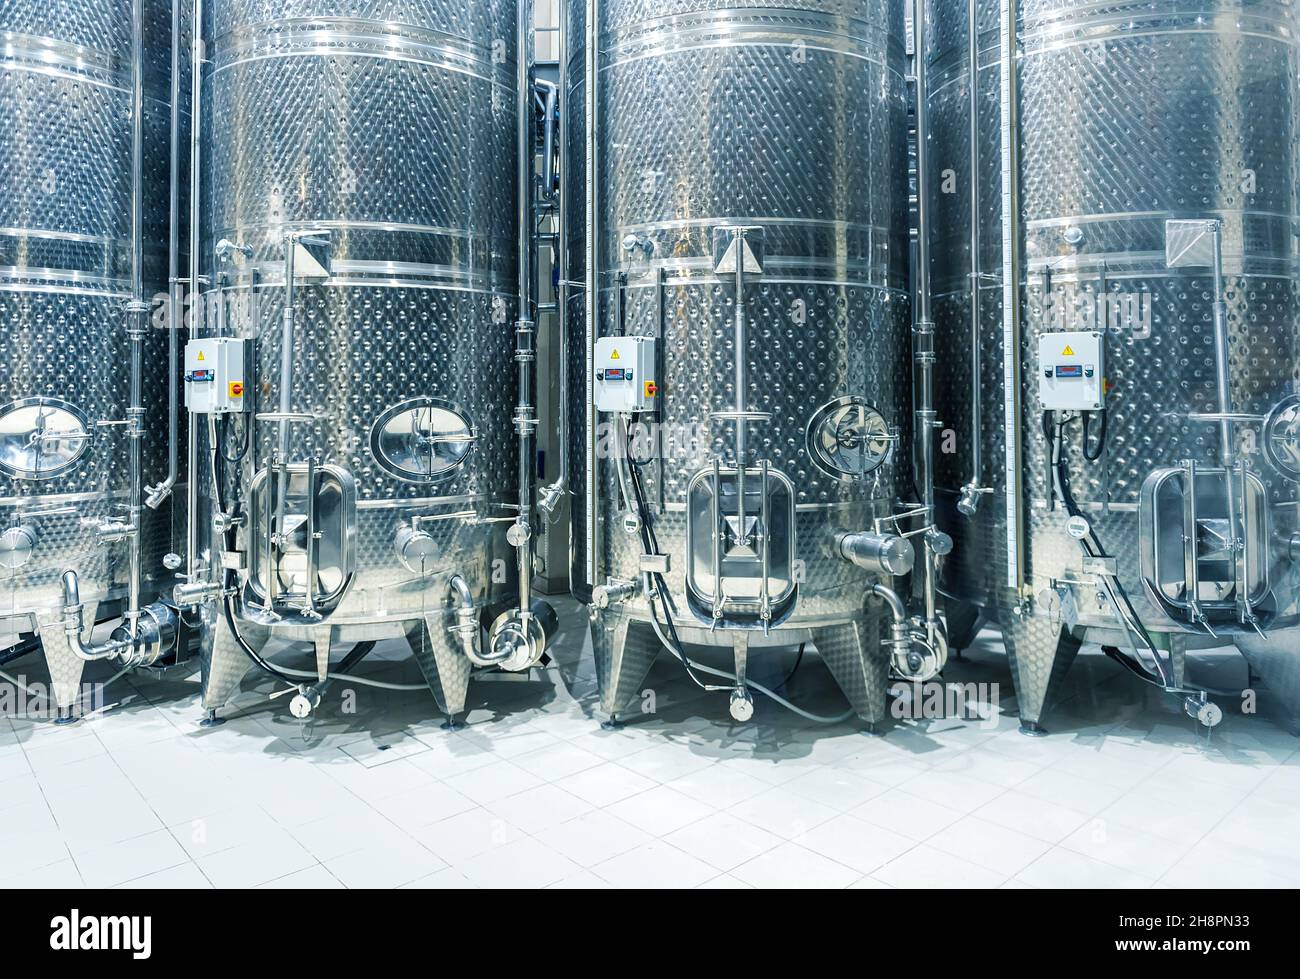 Steel vats for fermenting grapes in a row. Modern winery interior Stock Photo